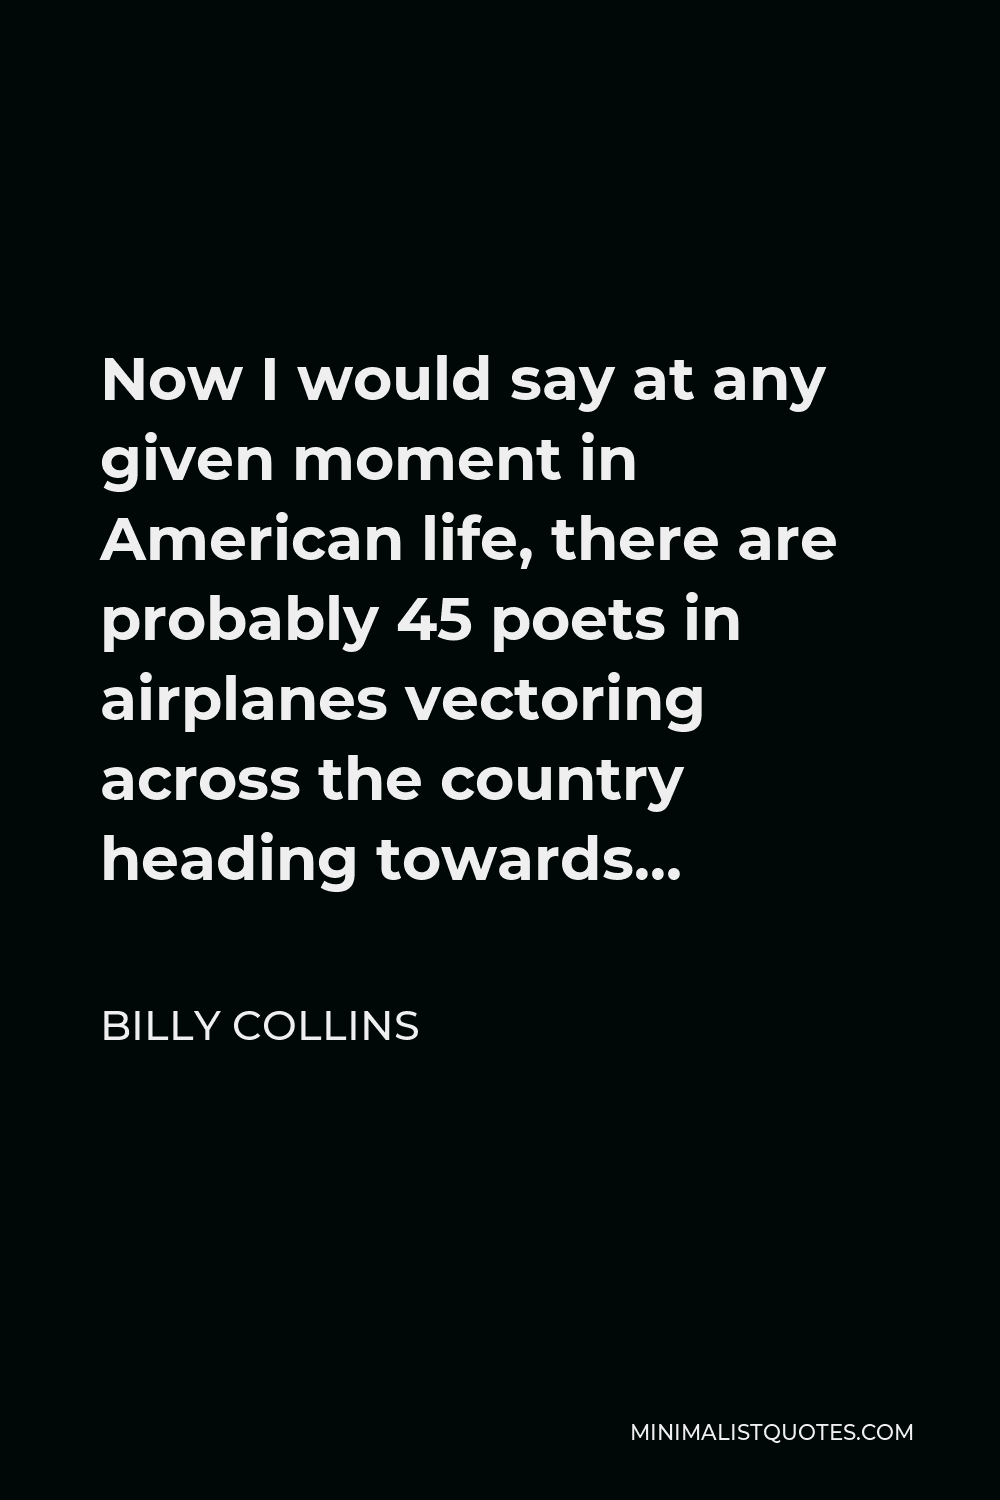 Billy Collins Quote - Now I would say at any given moment in American life, there are probably 45 poets in airplanes vectoring across the country heading towards…